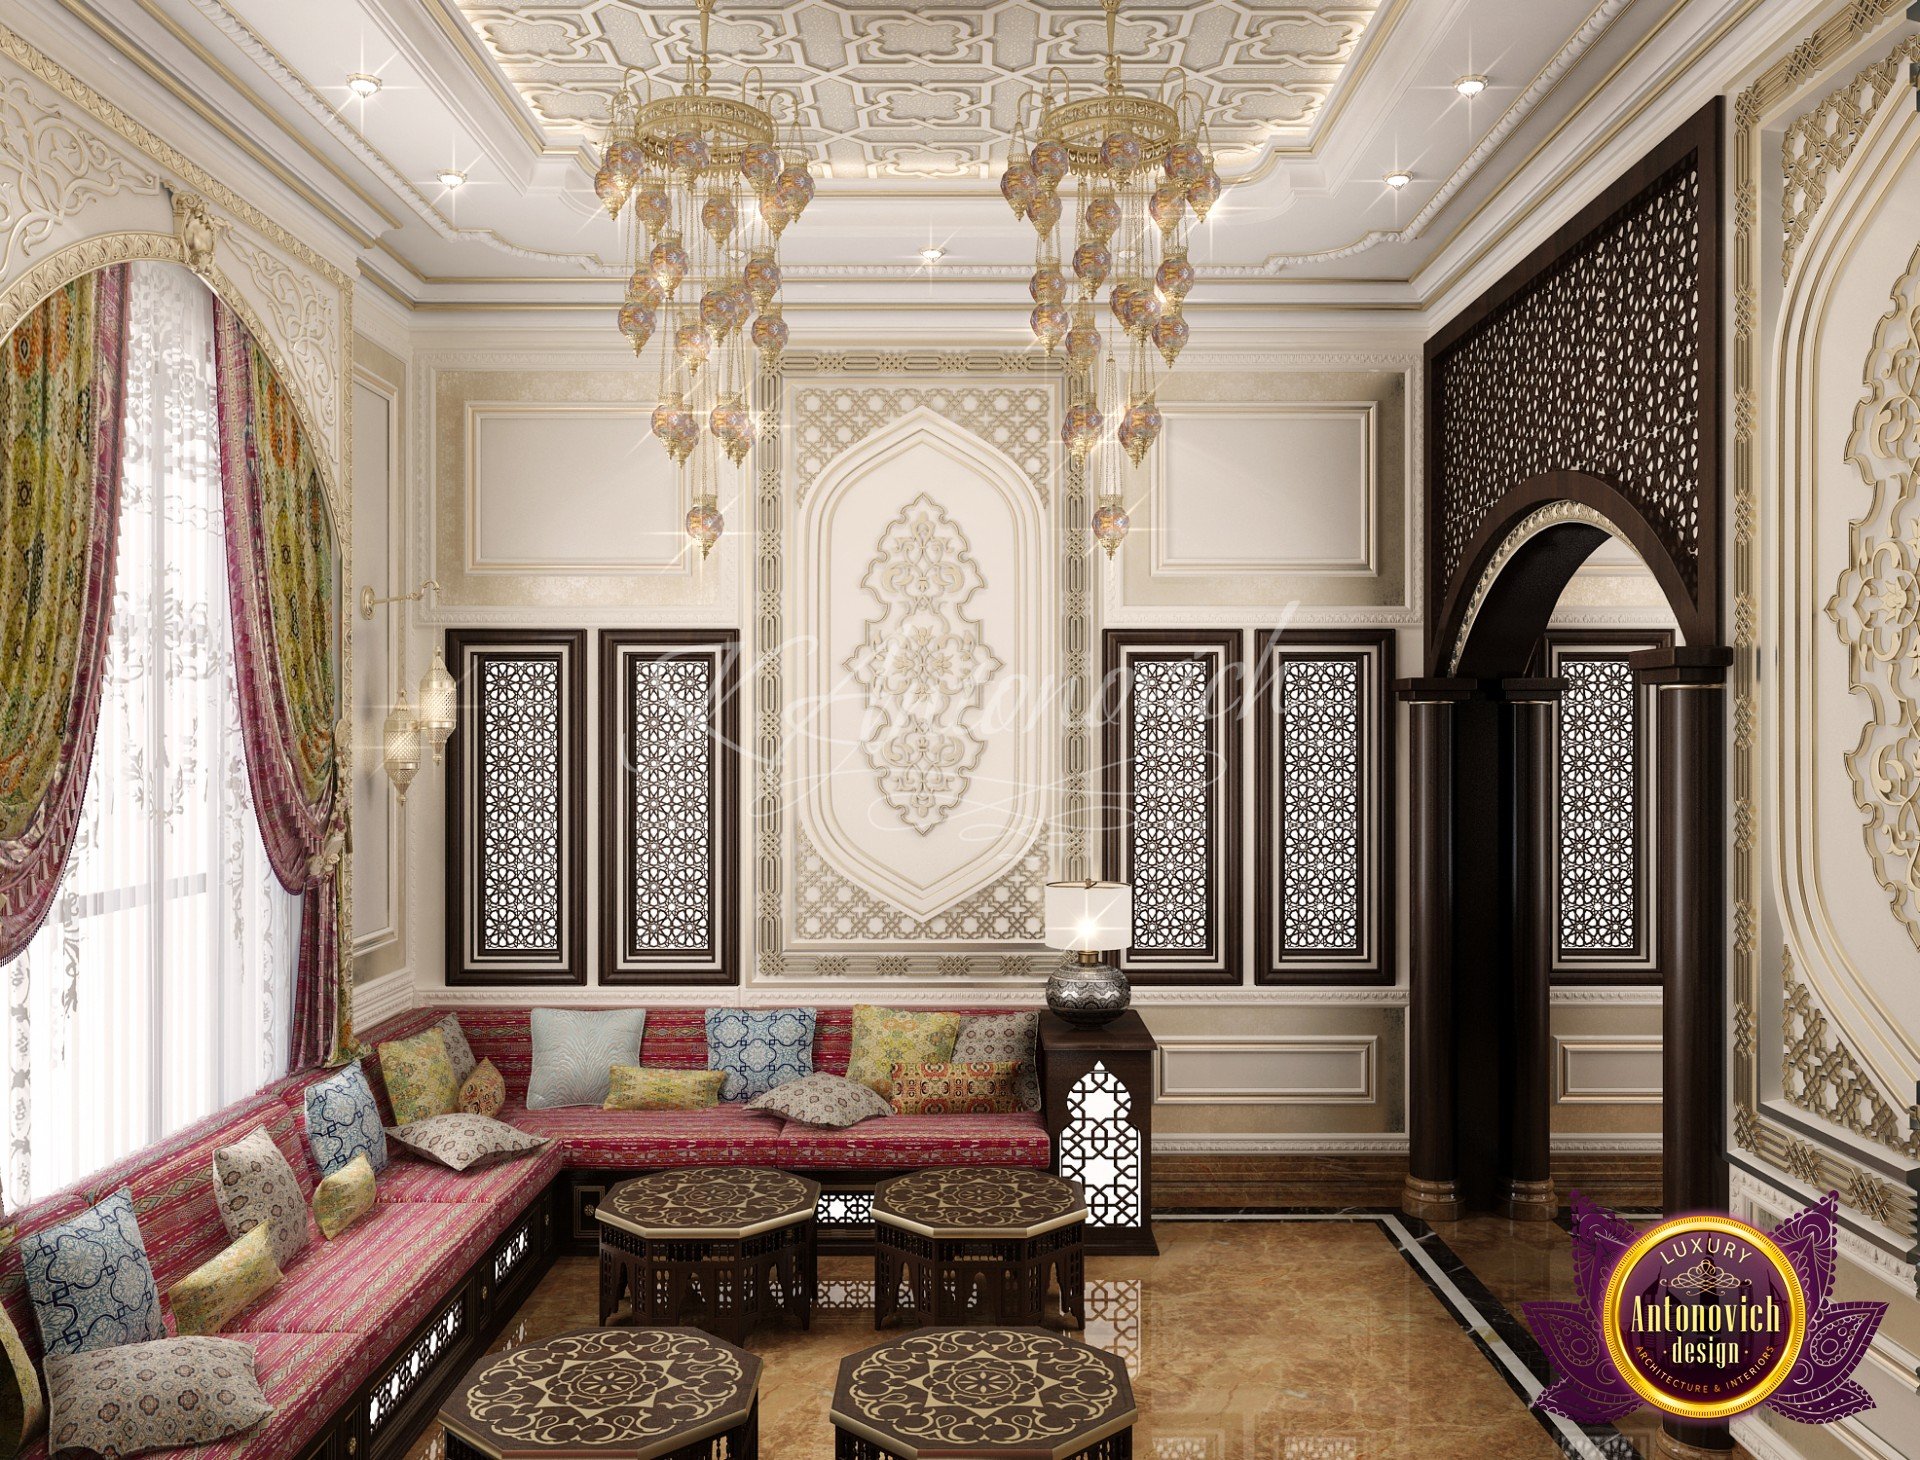 Sophisticated Arabic Majlis Room design with a perfect blend of tradition and modernity